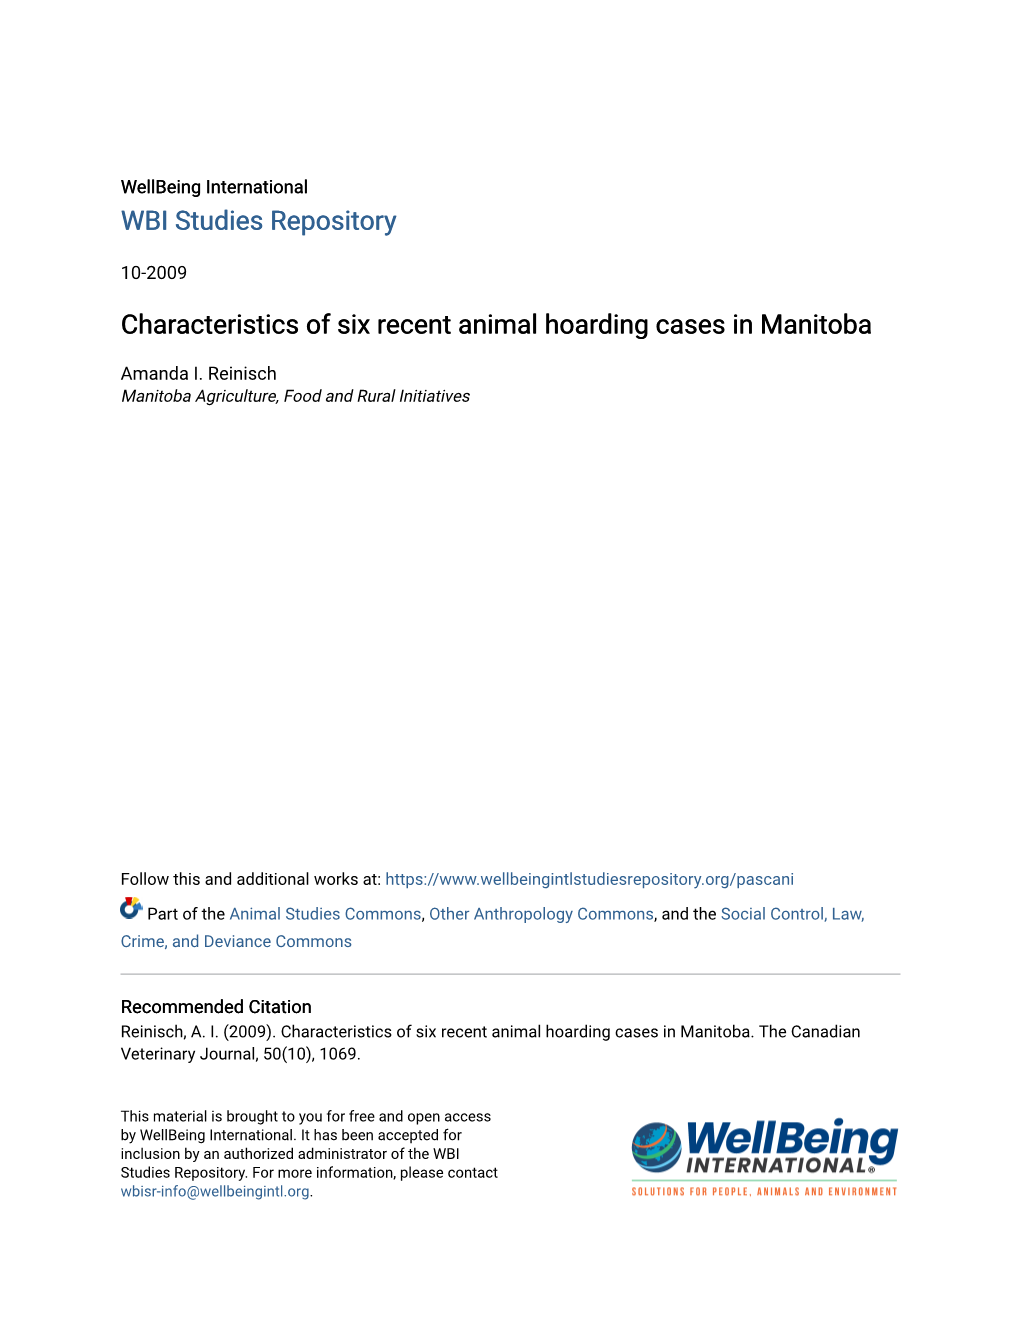 Characteristics of Six Recent Animal Hoarding Cases in Manitoba